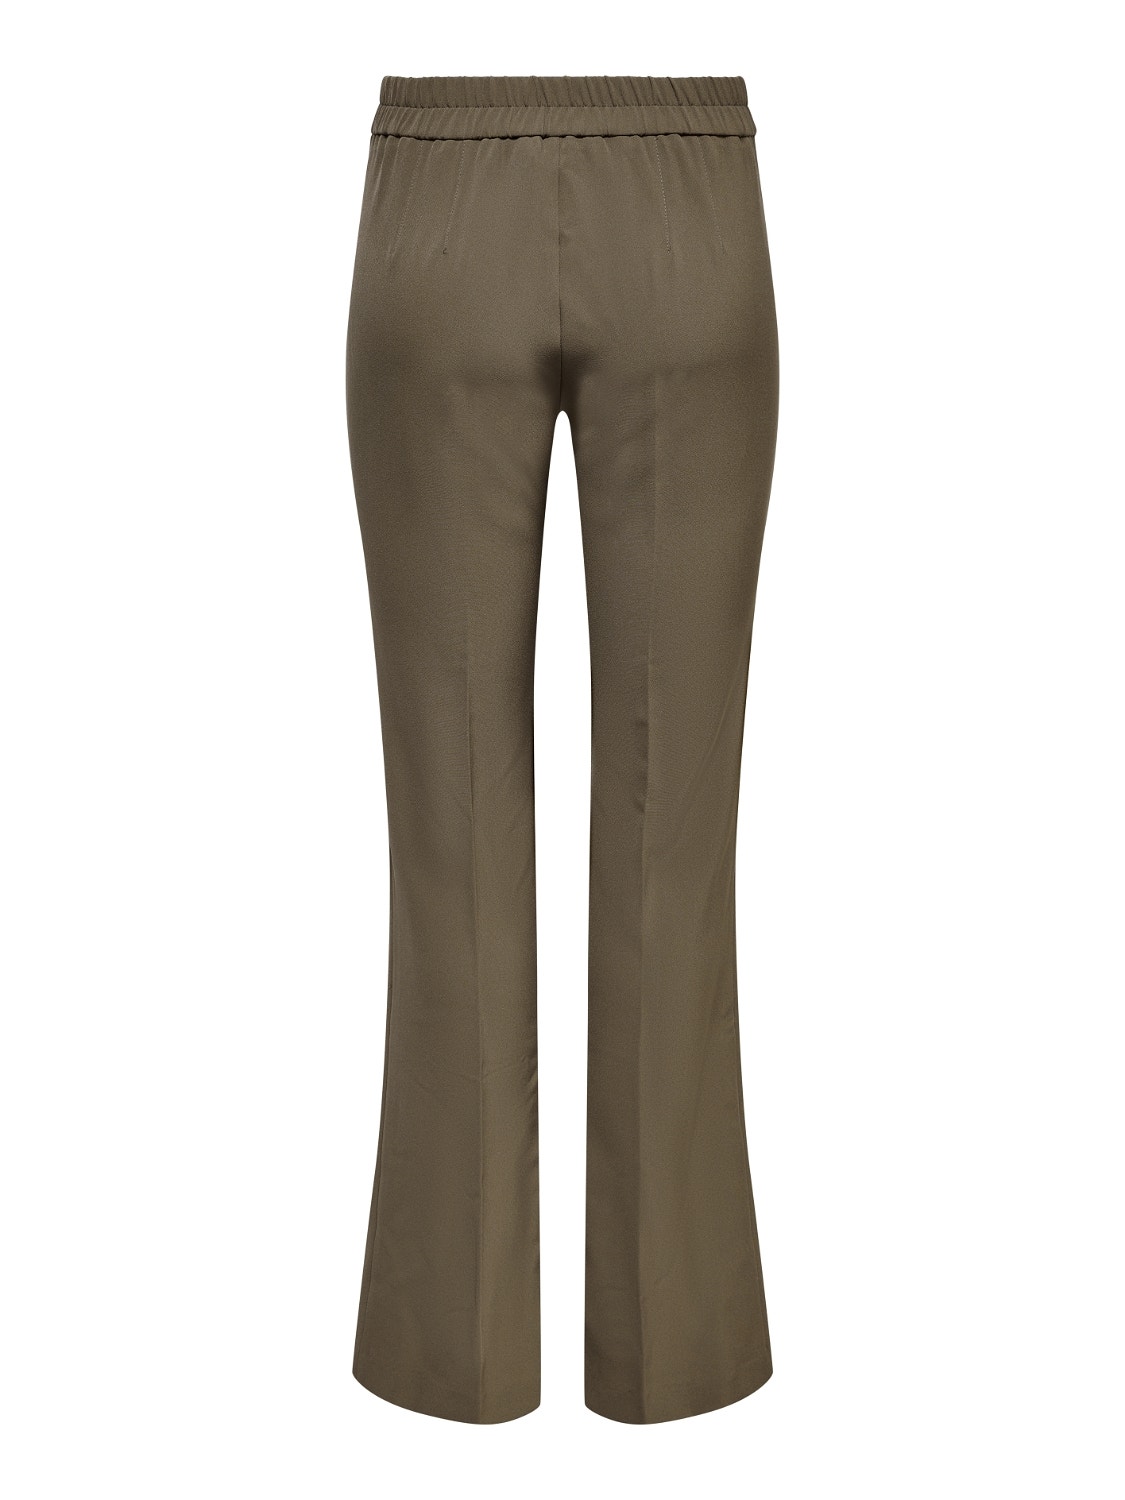 ONLY High waisted flared fit Trousers -Cub - 15264525